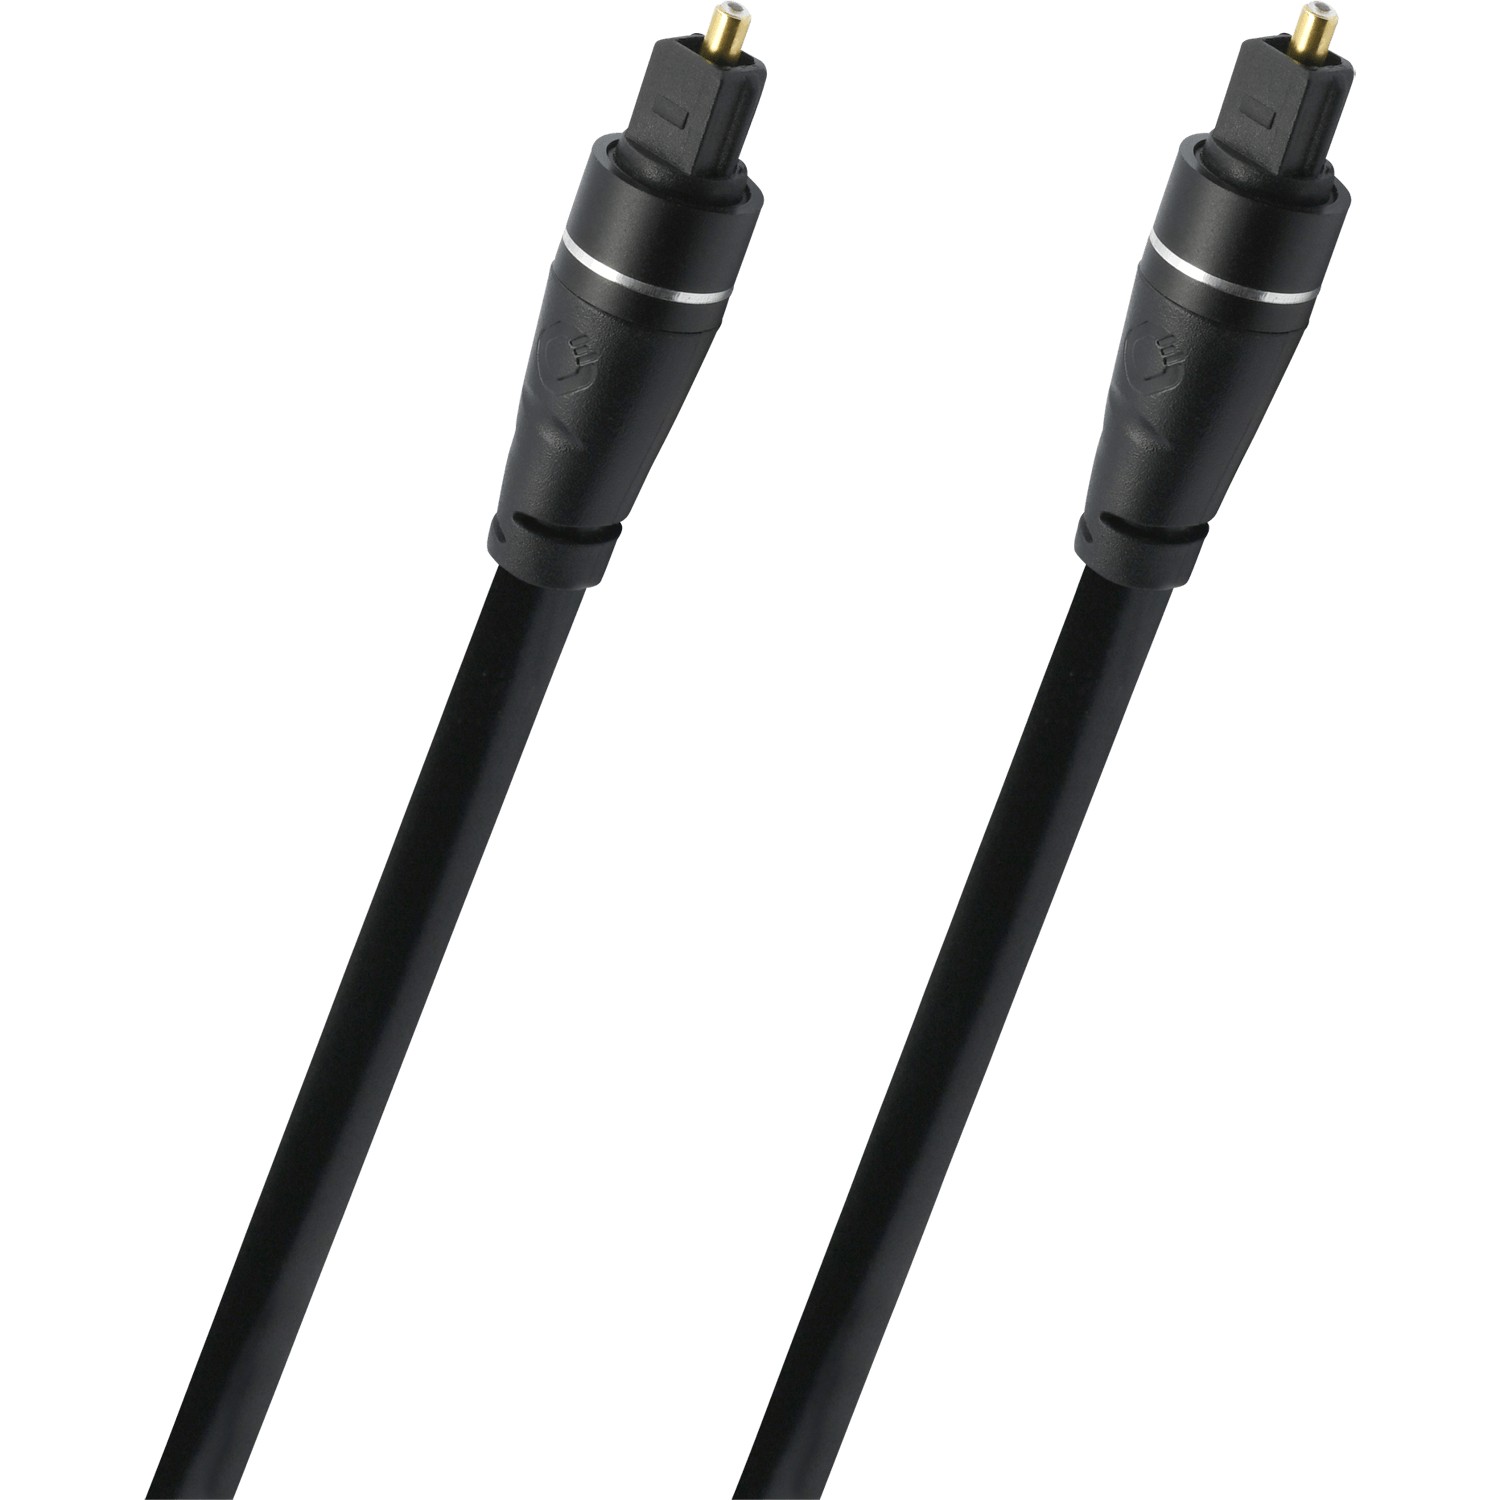 Кабели межблочные аудио Oehlbach EXCELLENCE Select Opto Link, Toslink cable 3,0m sw, D1C33134 кабели межблочные аудио oehlbach excellence select opto link toslink cable 3 0m sw d1c33134